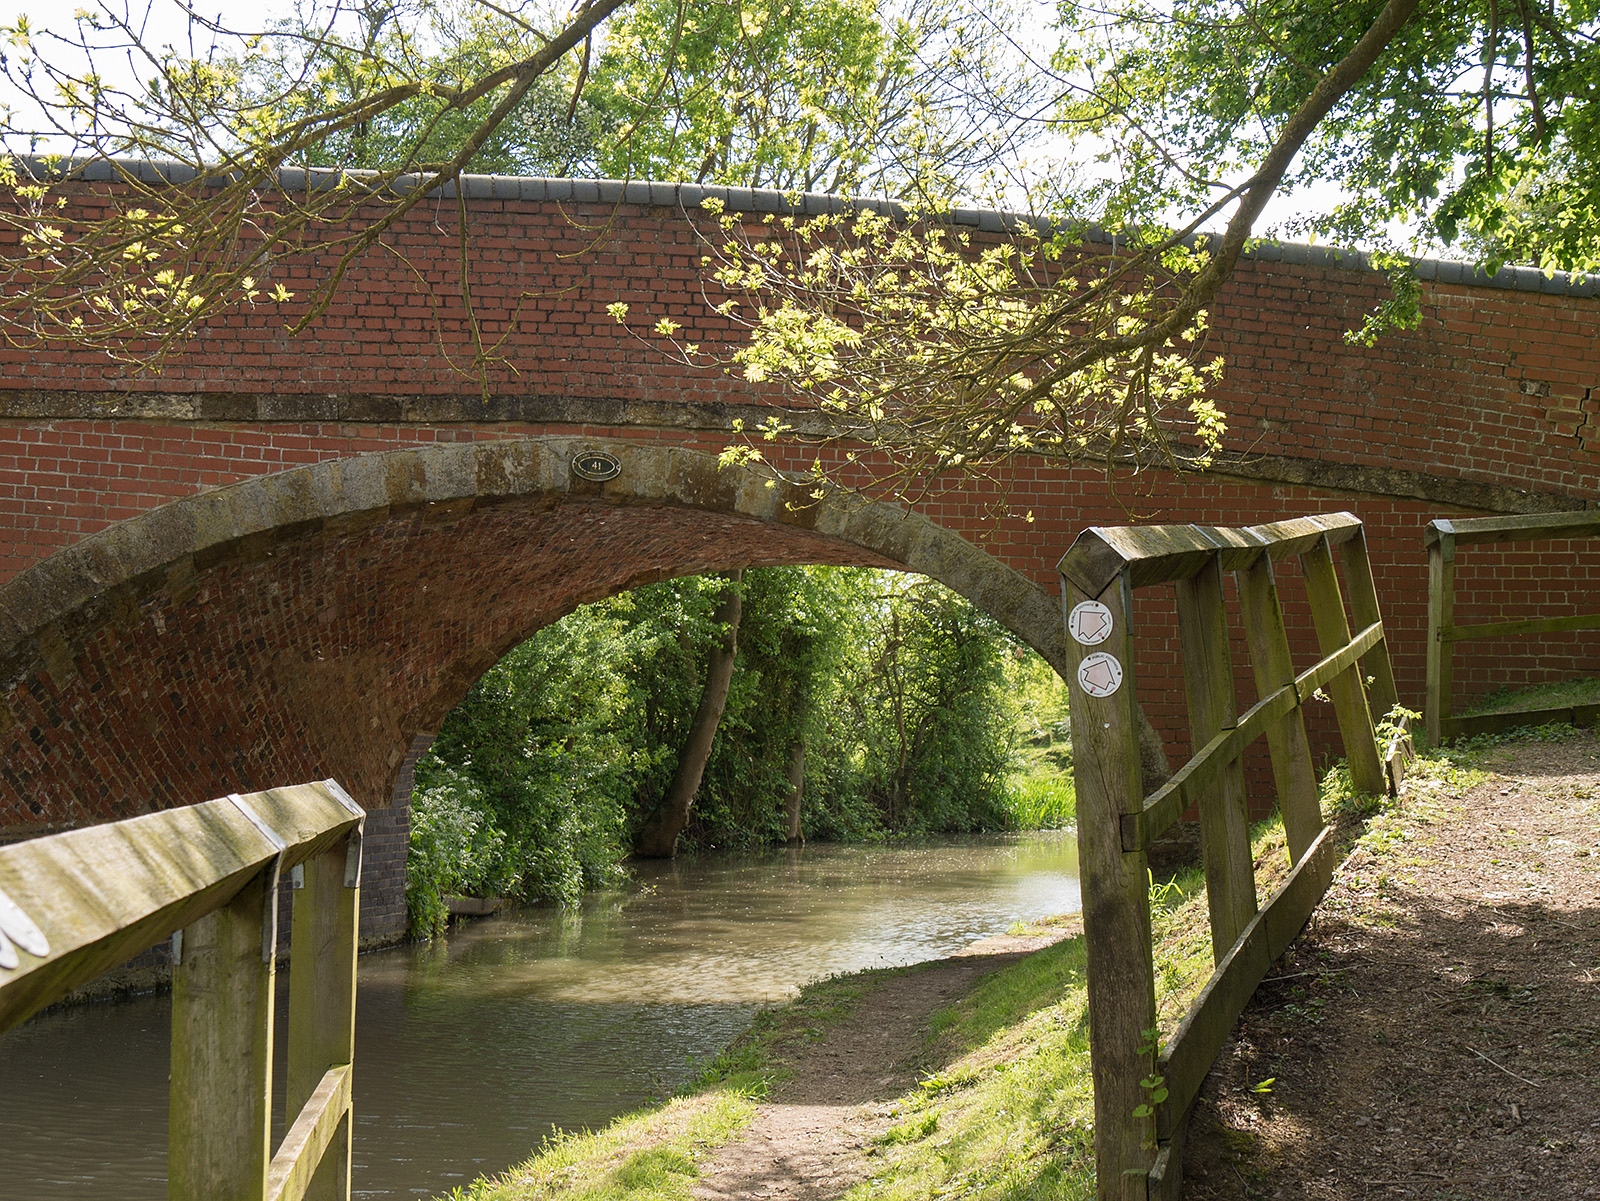 Bridge 41 carries the walking route known as Midshires way